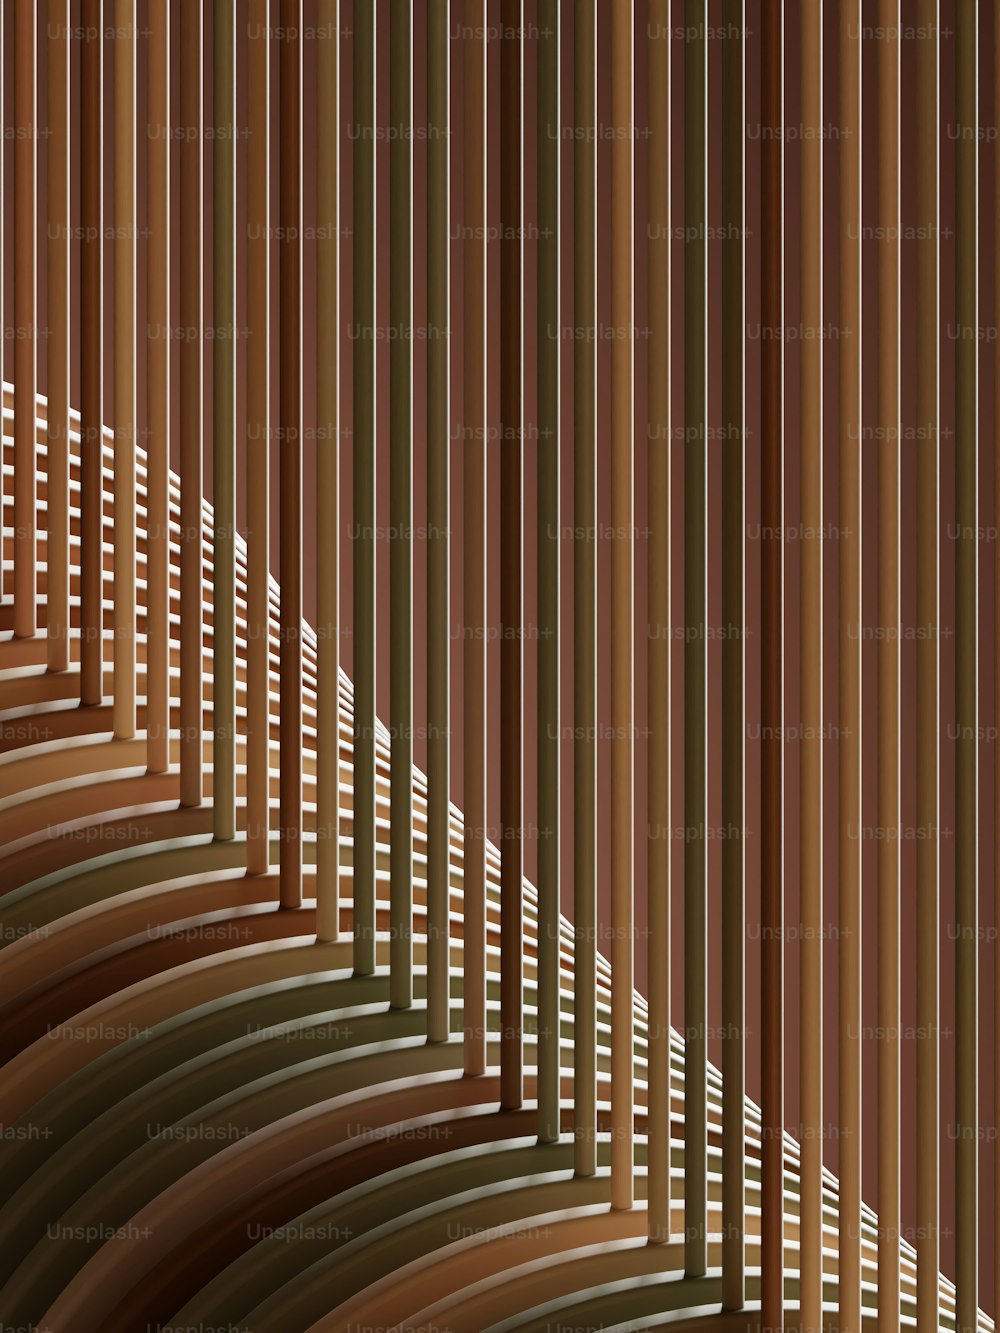 an abstract image of a line of wood slats